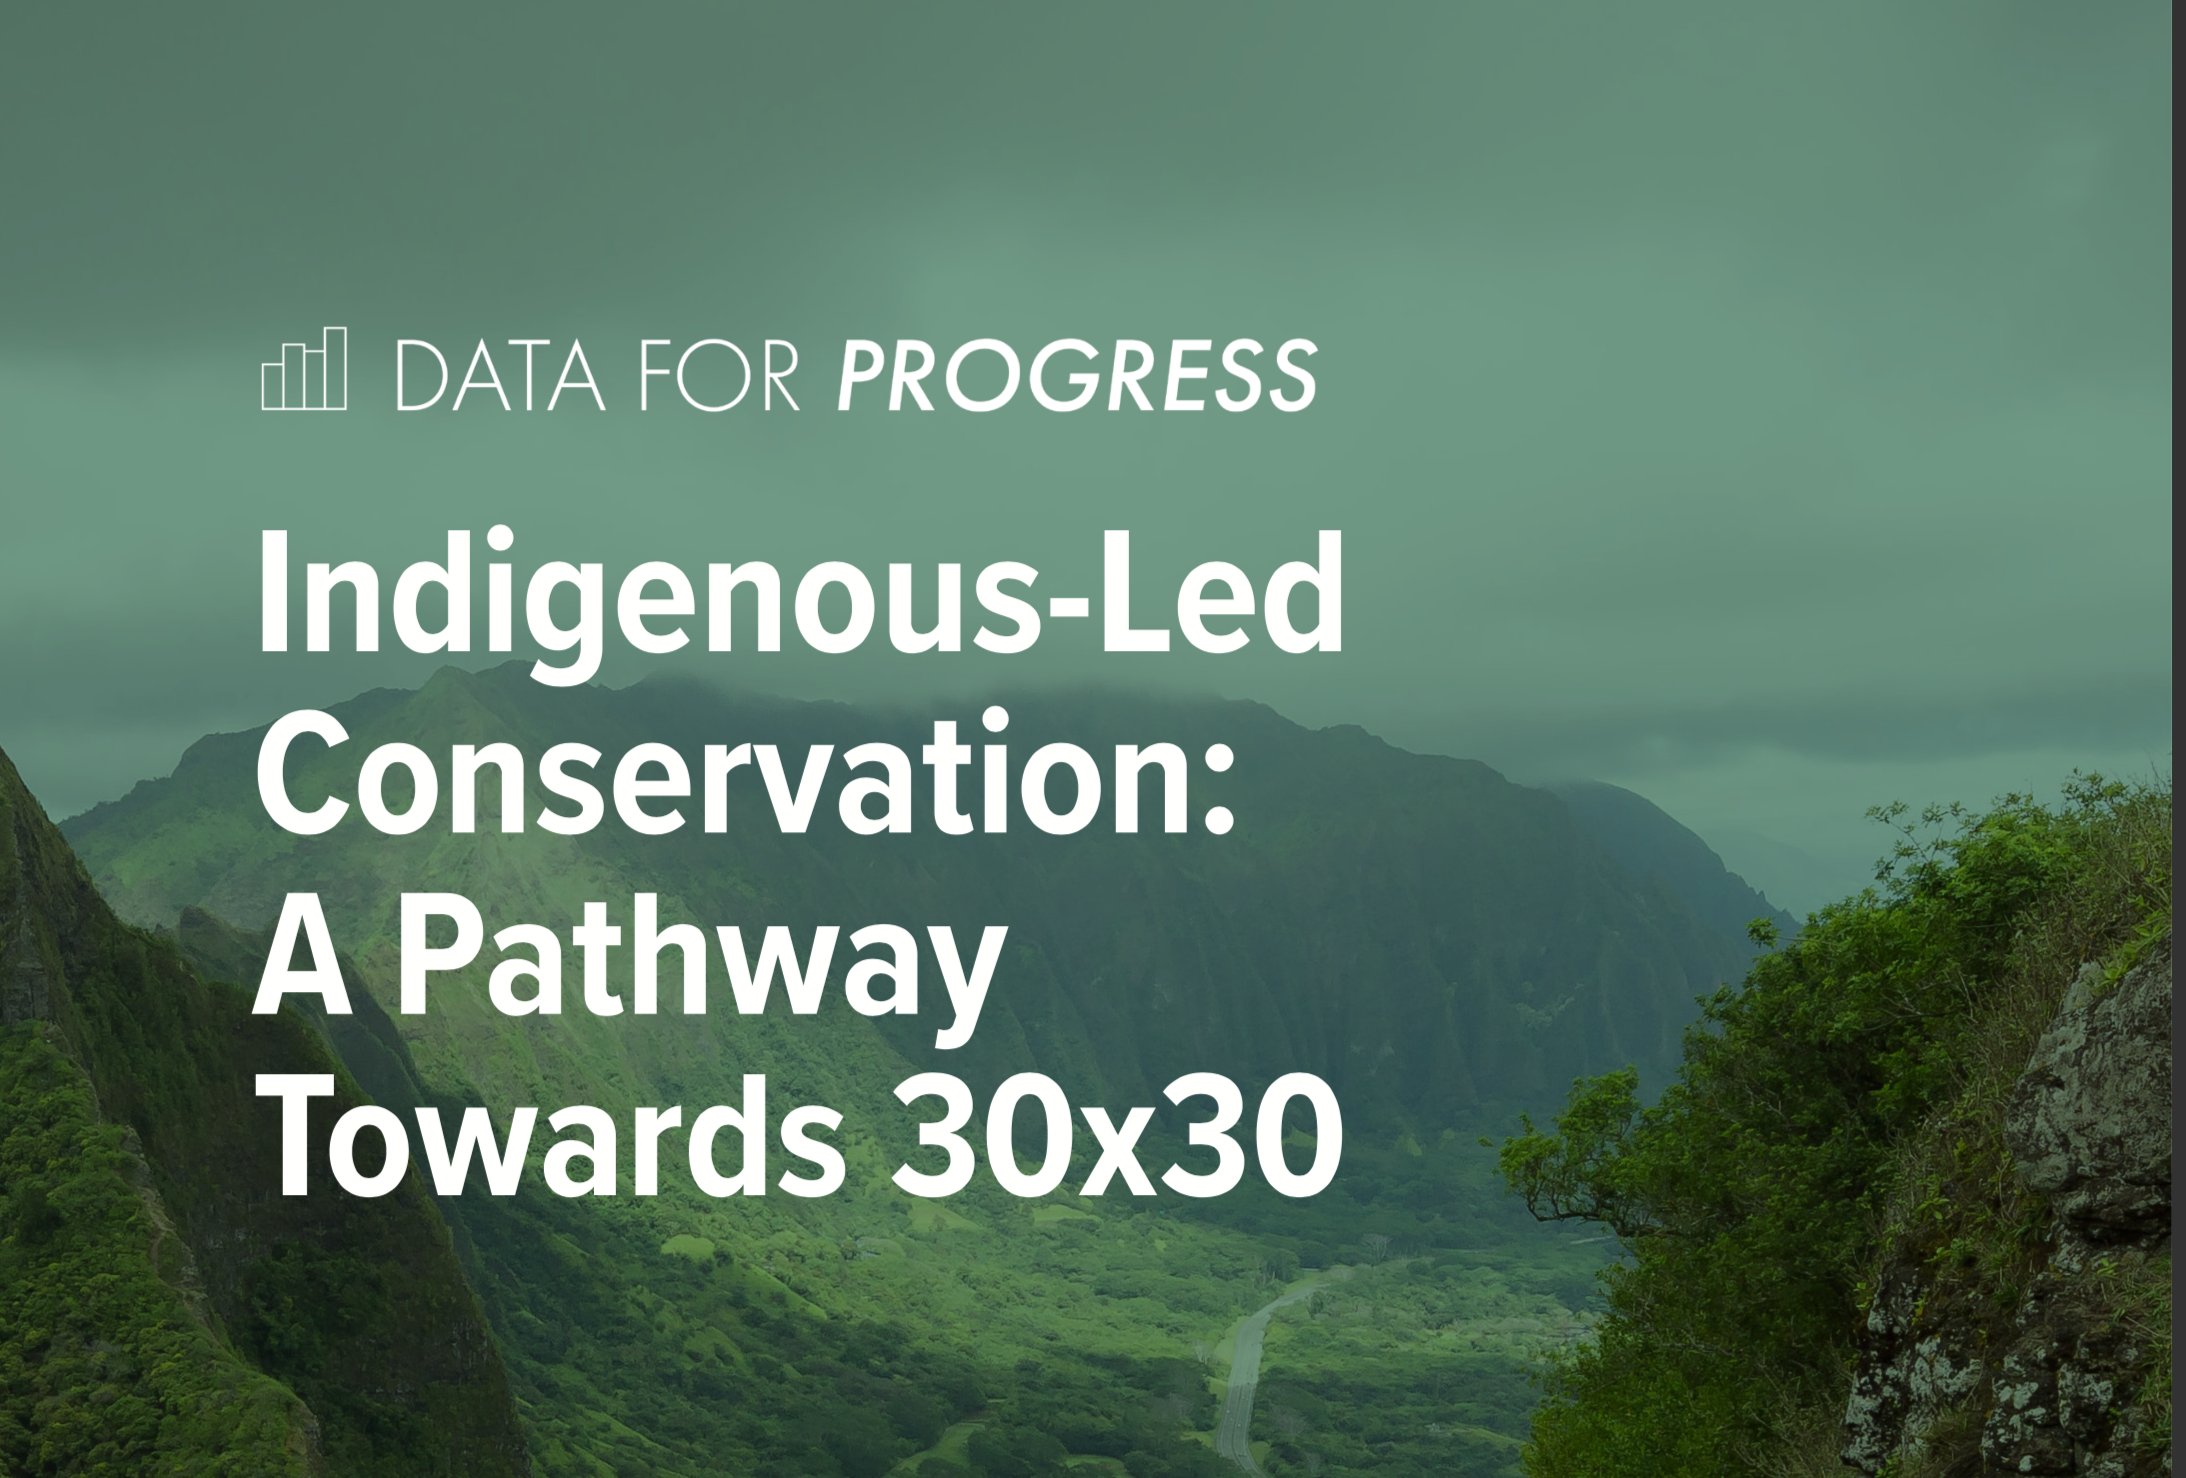 Memo: Conservation: A Pathway Towards